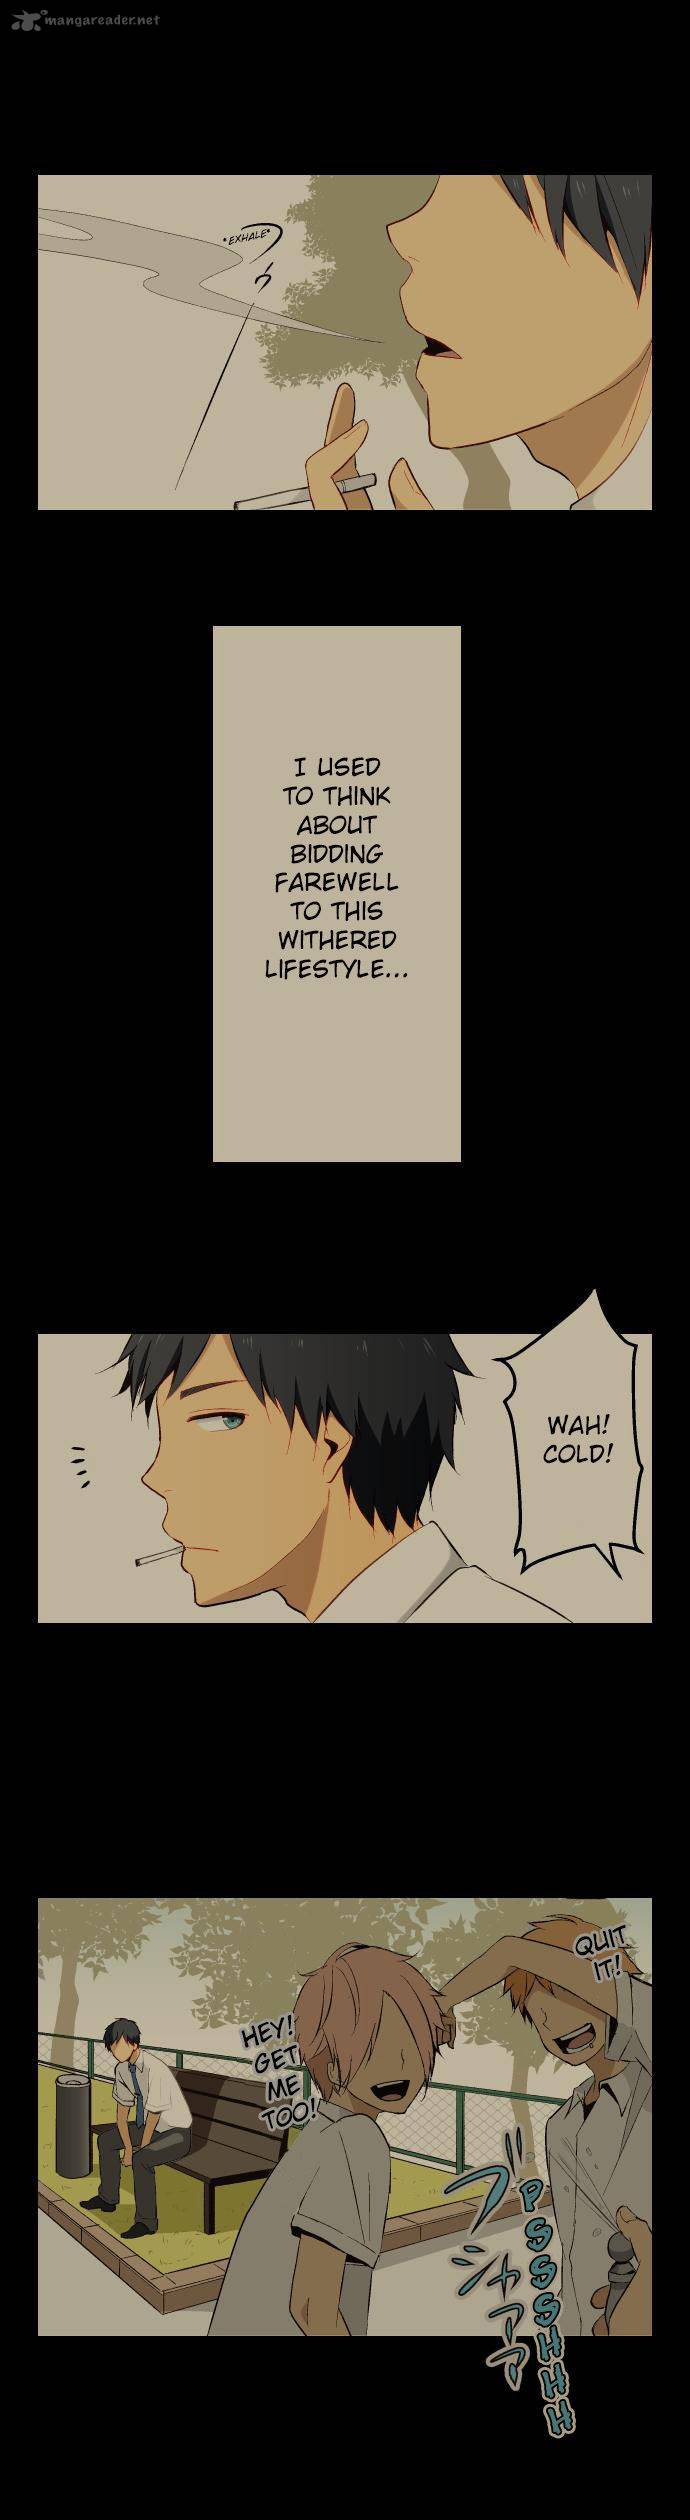 Relife Chapter 6 Page 1